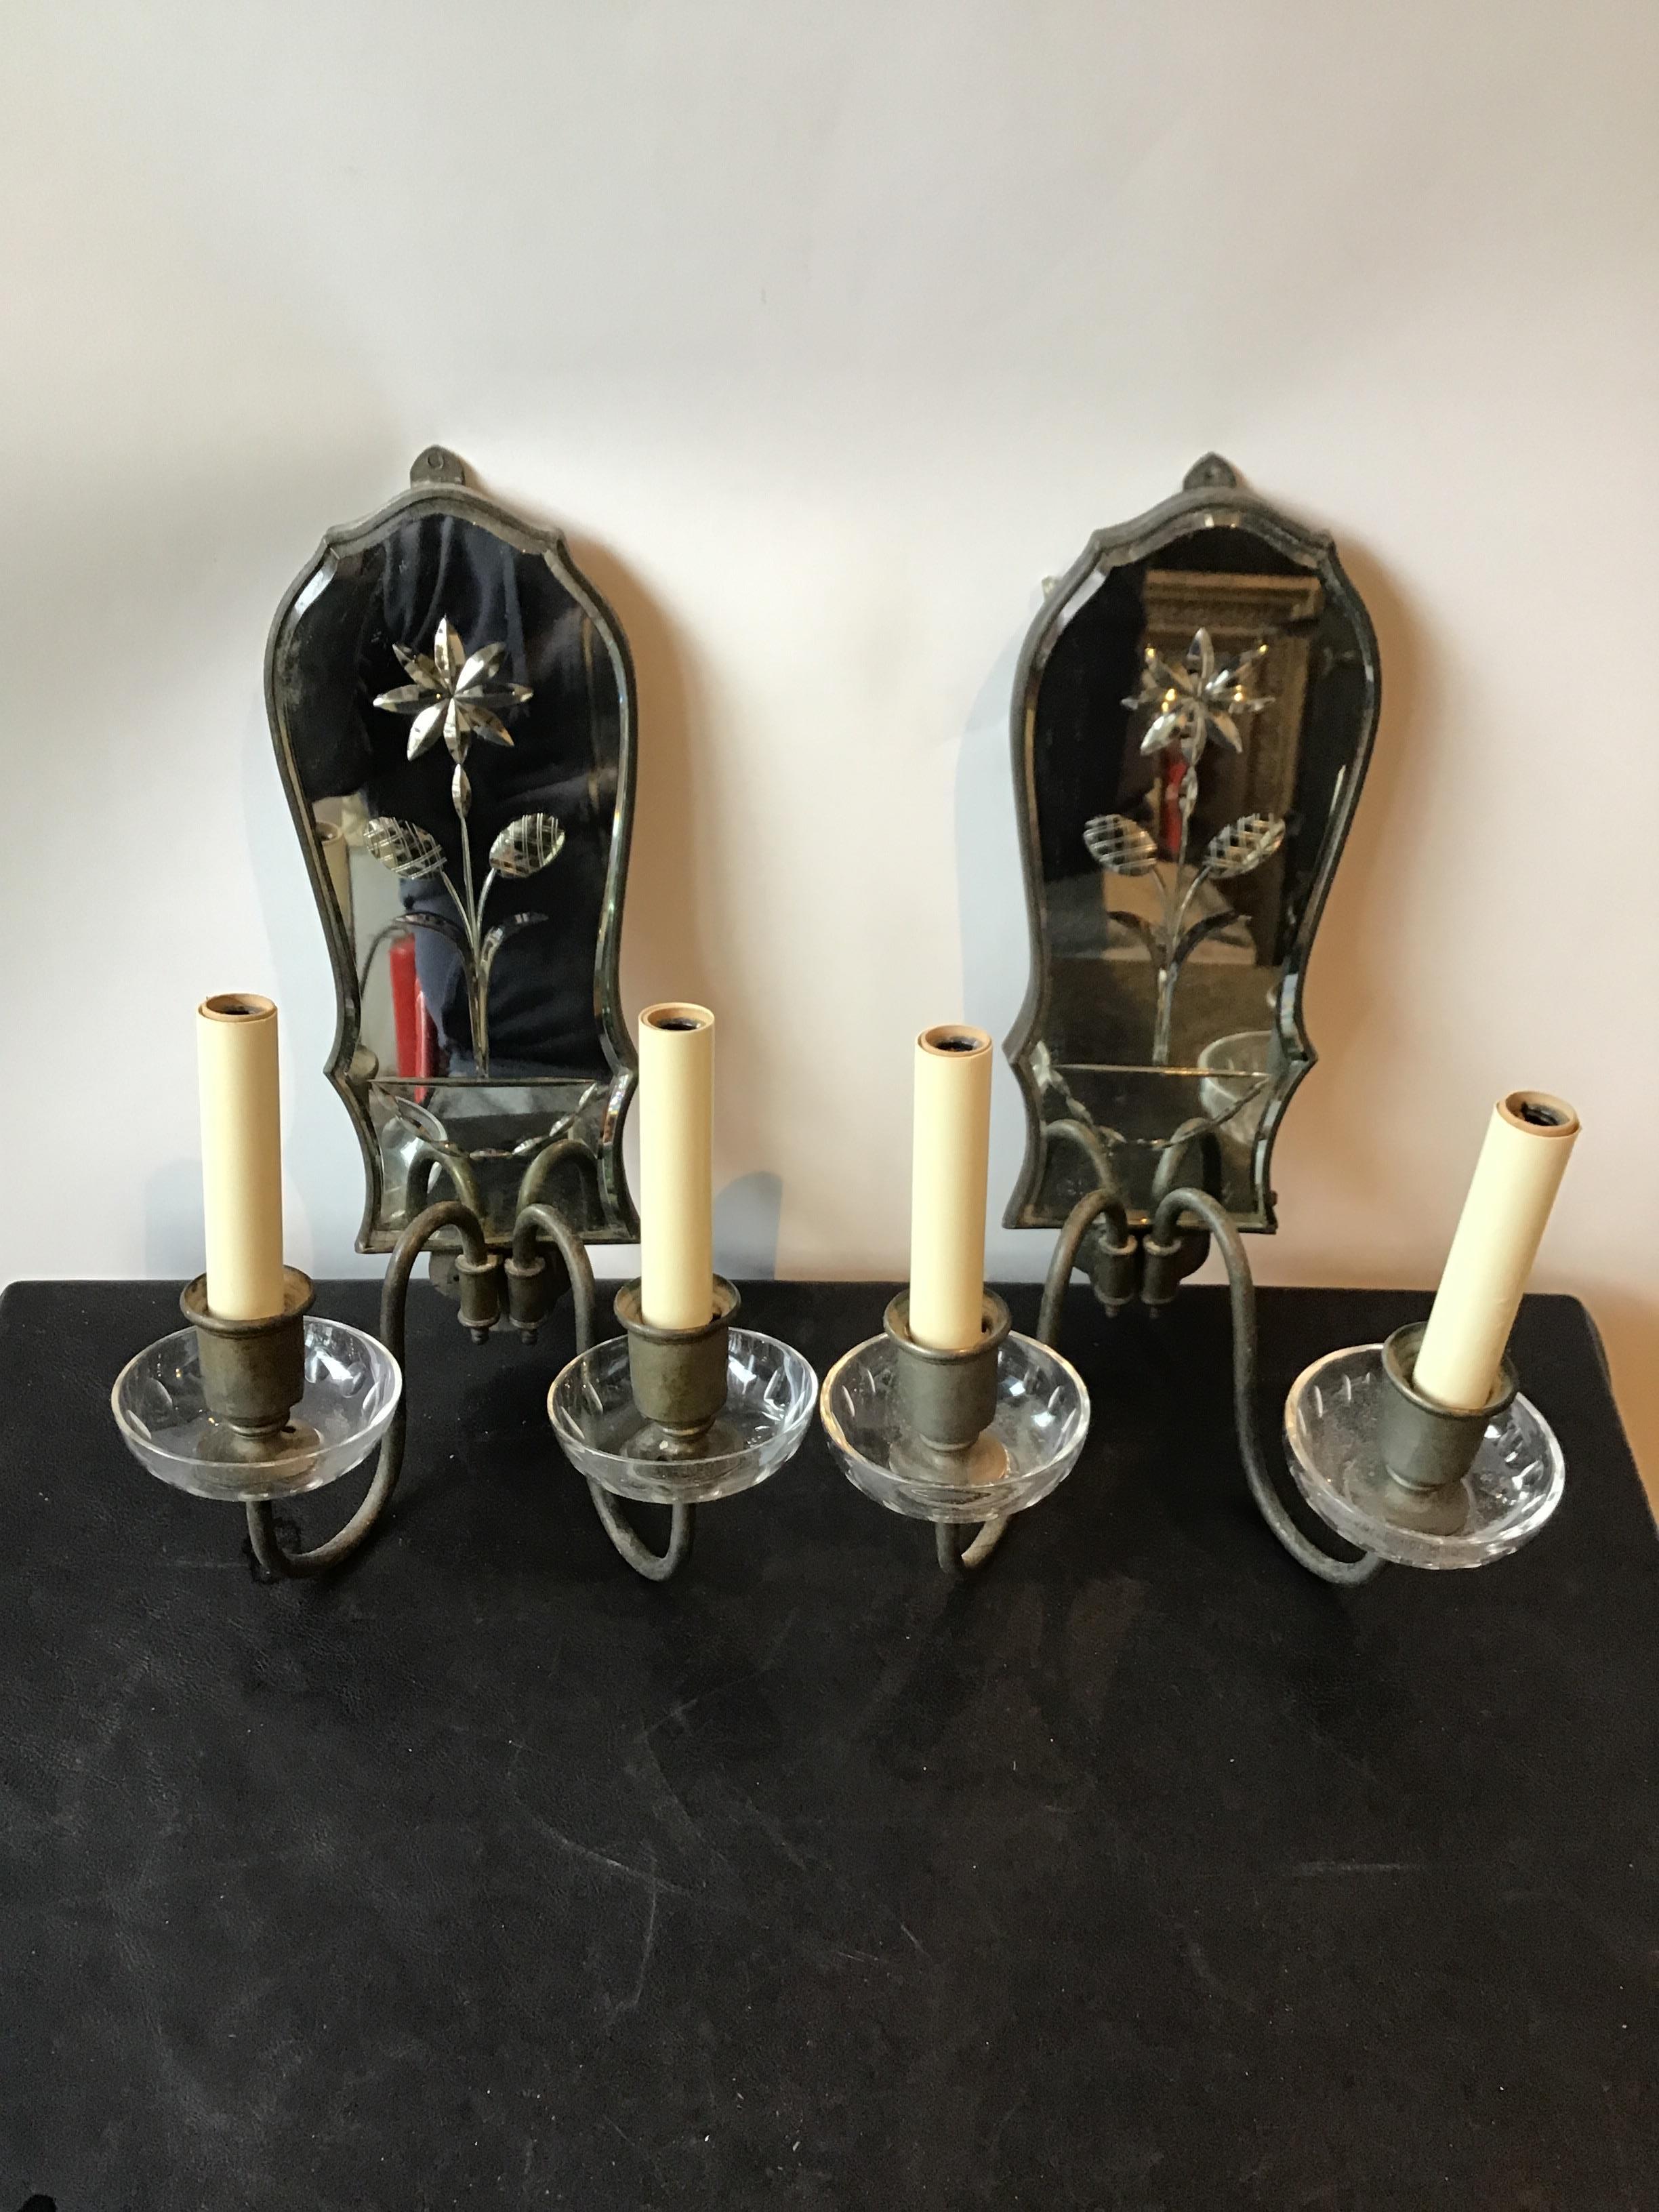 Pair of 1920s mirrored sconces. Flower in urn.